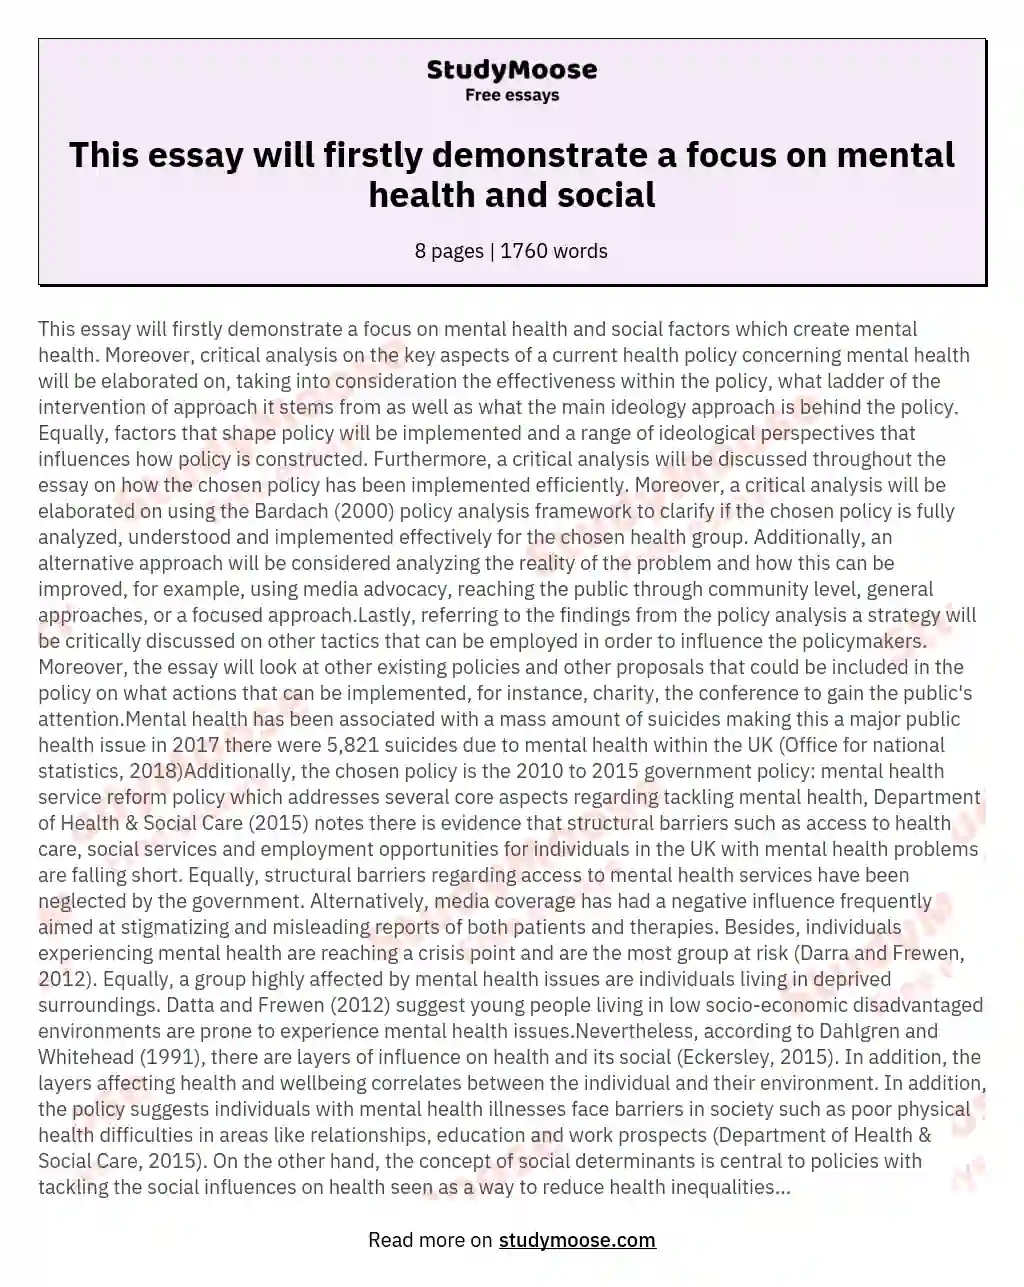 This essay will firstly demonstrate a focus on mental health and social